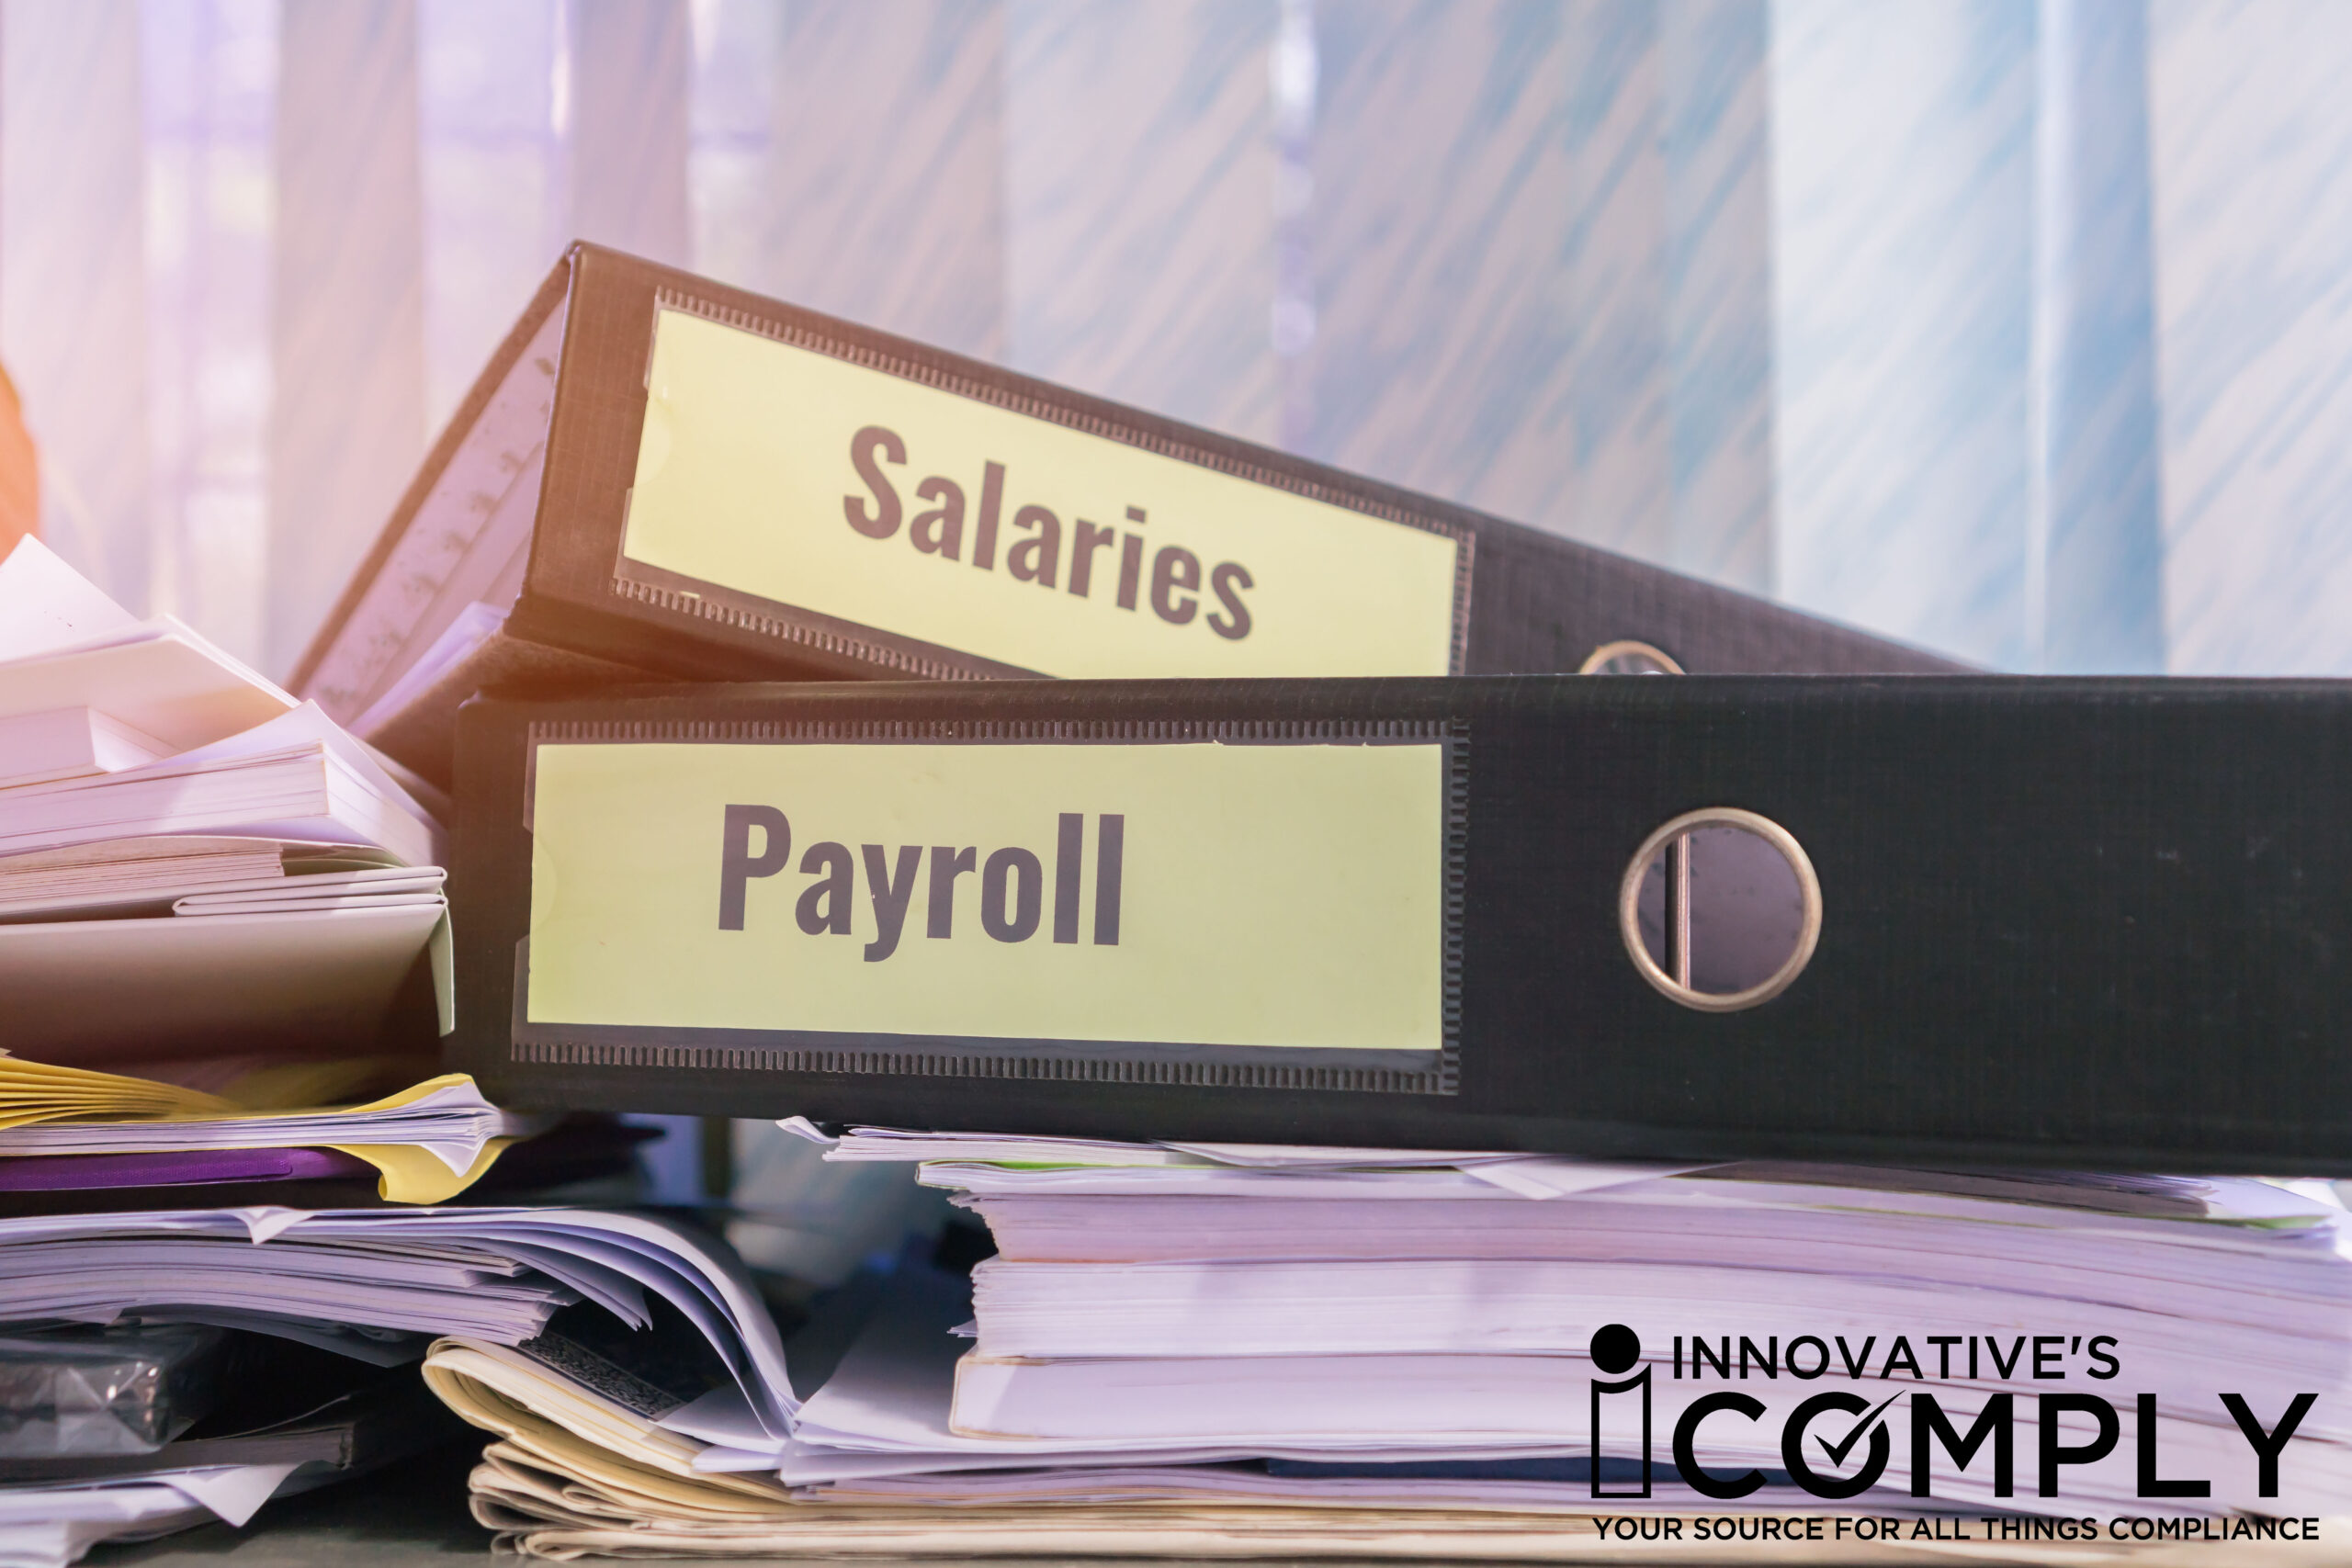 Payroll and salaries for leap year 2020 on desk